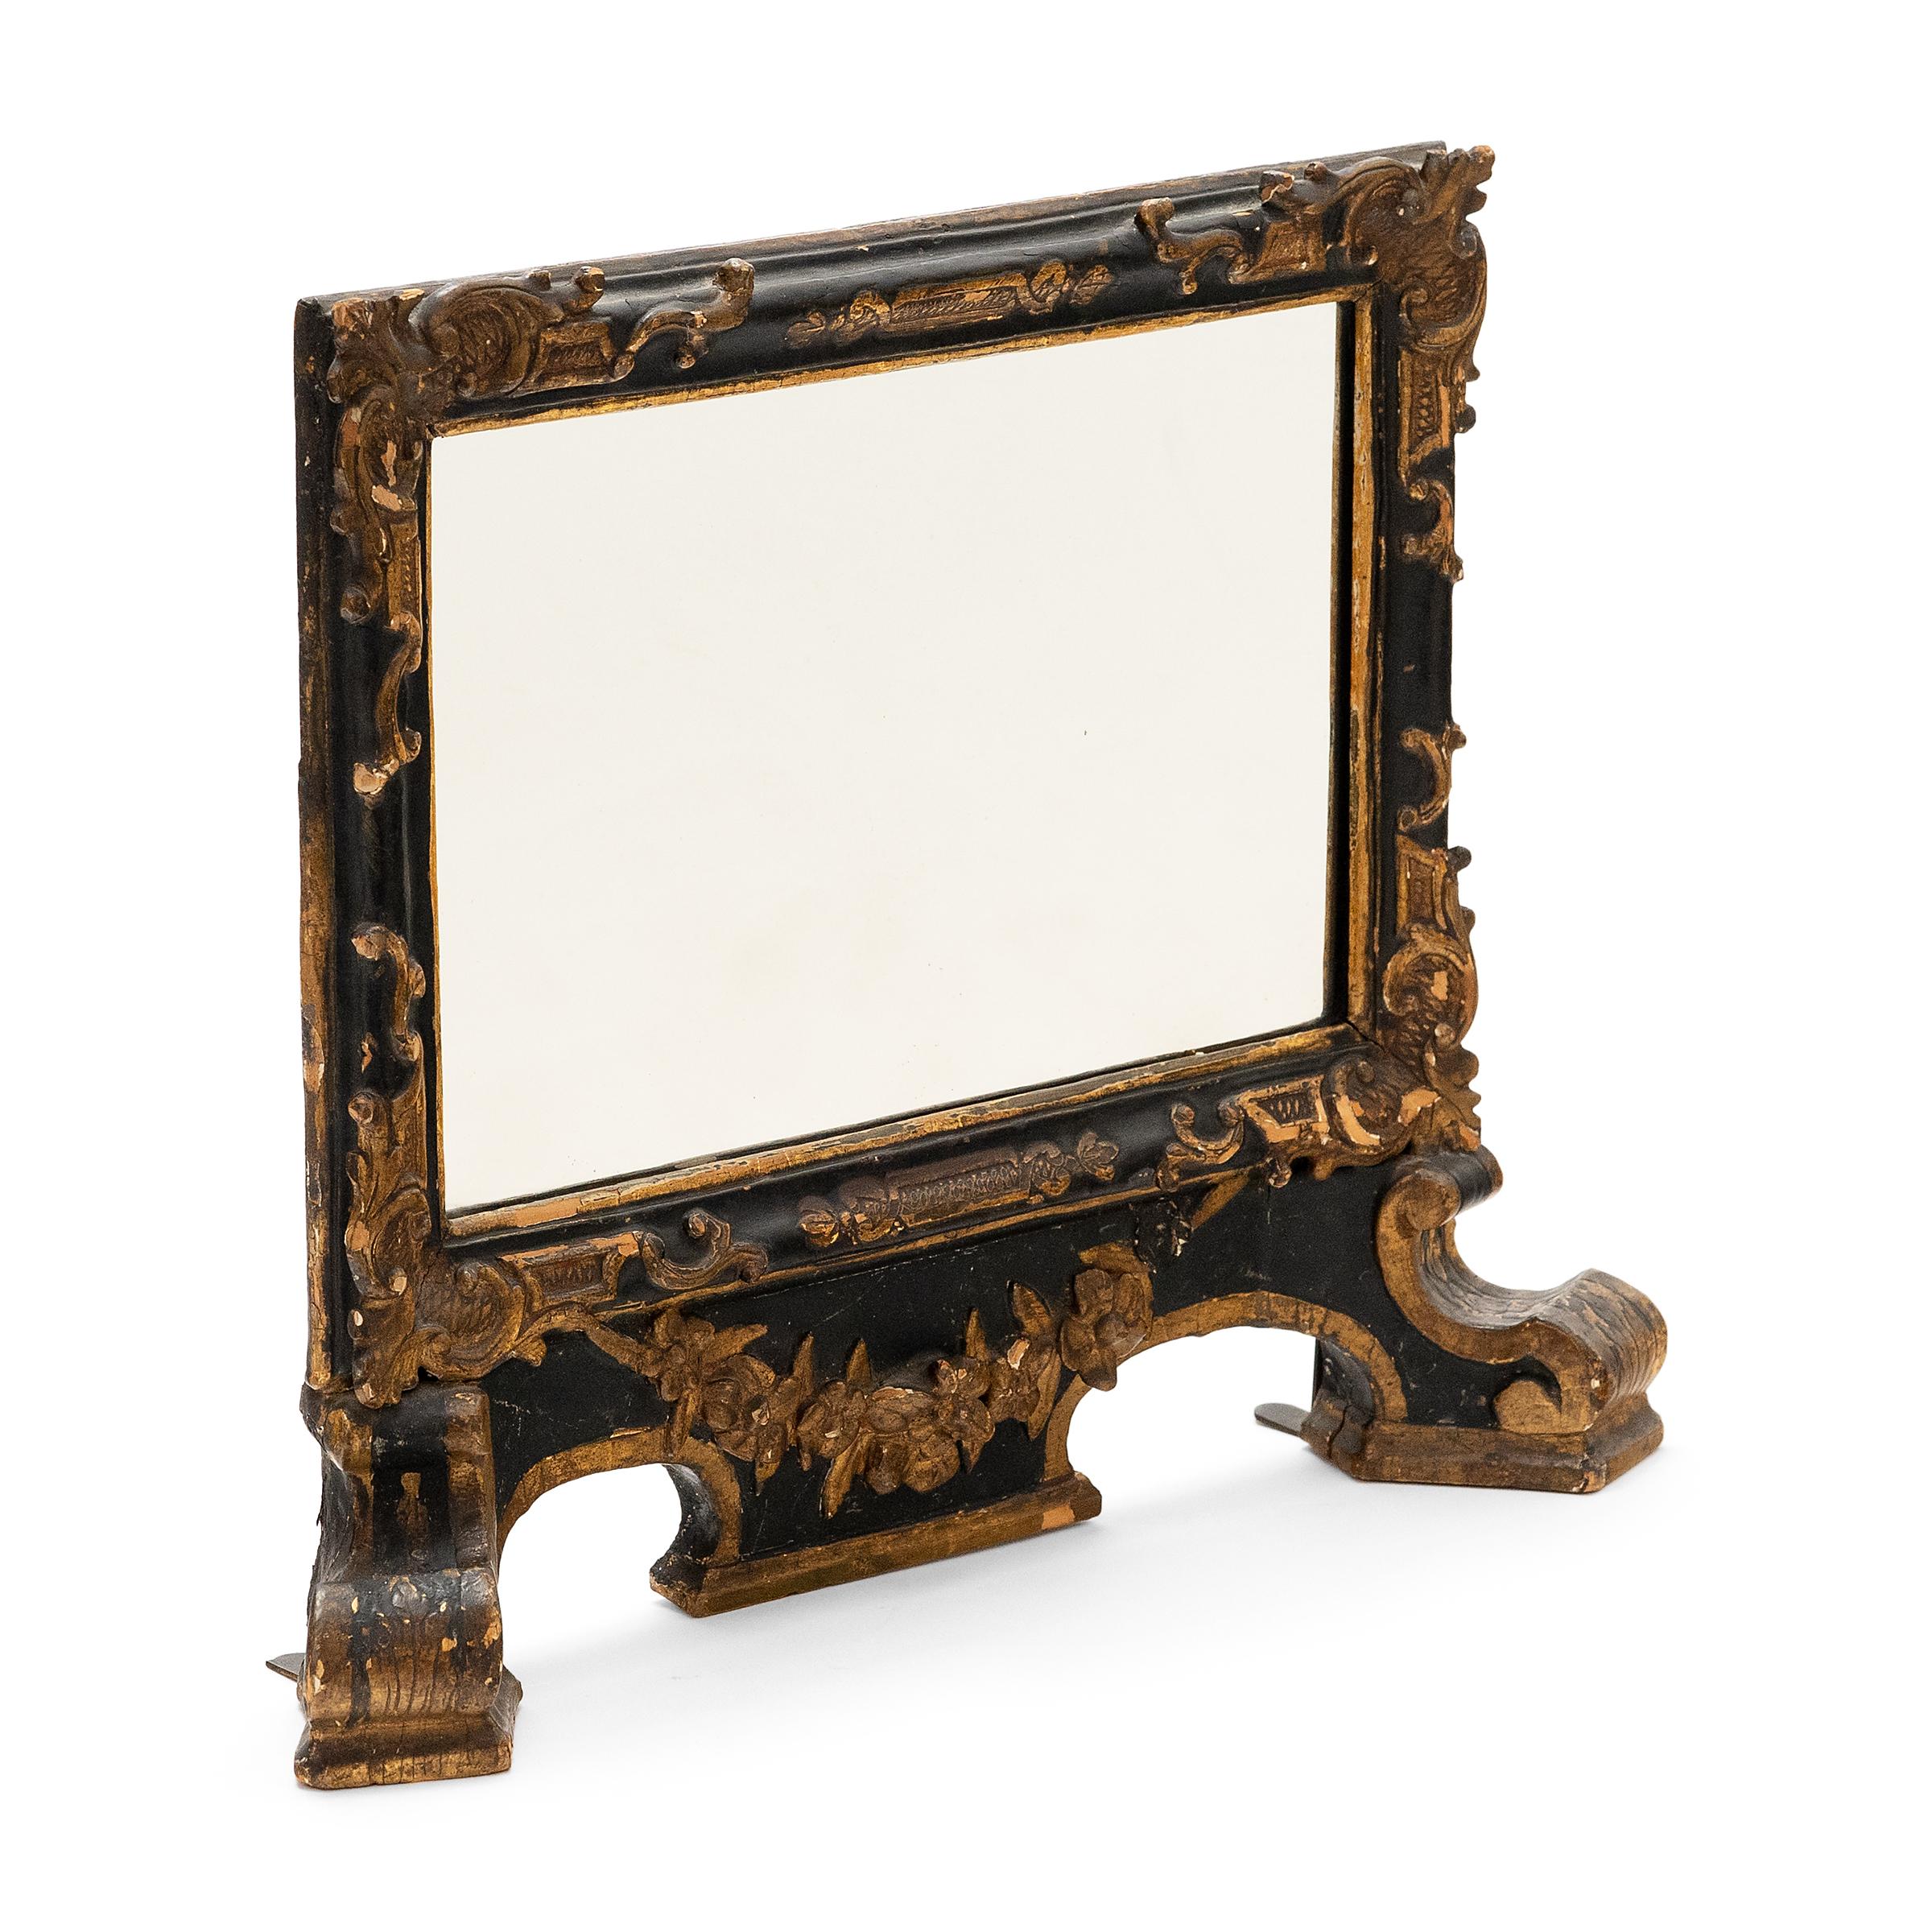 With intricate construction and exquisite decoration, this late-19th century table mirror is a true masterpiece of Chinoiserie-style craftsmanship and lacquerware. Decorated in gilt, the black lacquered wooden frame was shaped, embossed and chiseled